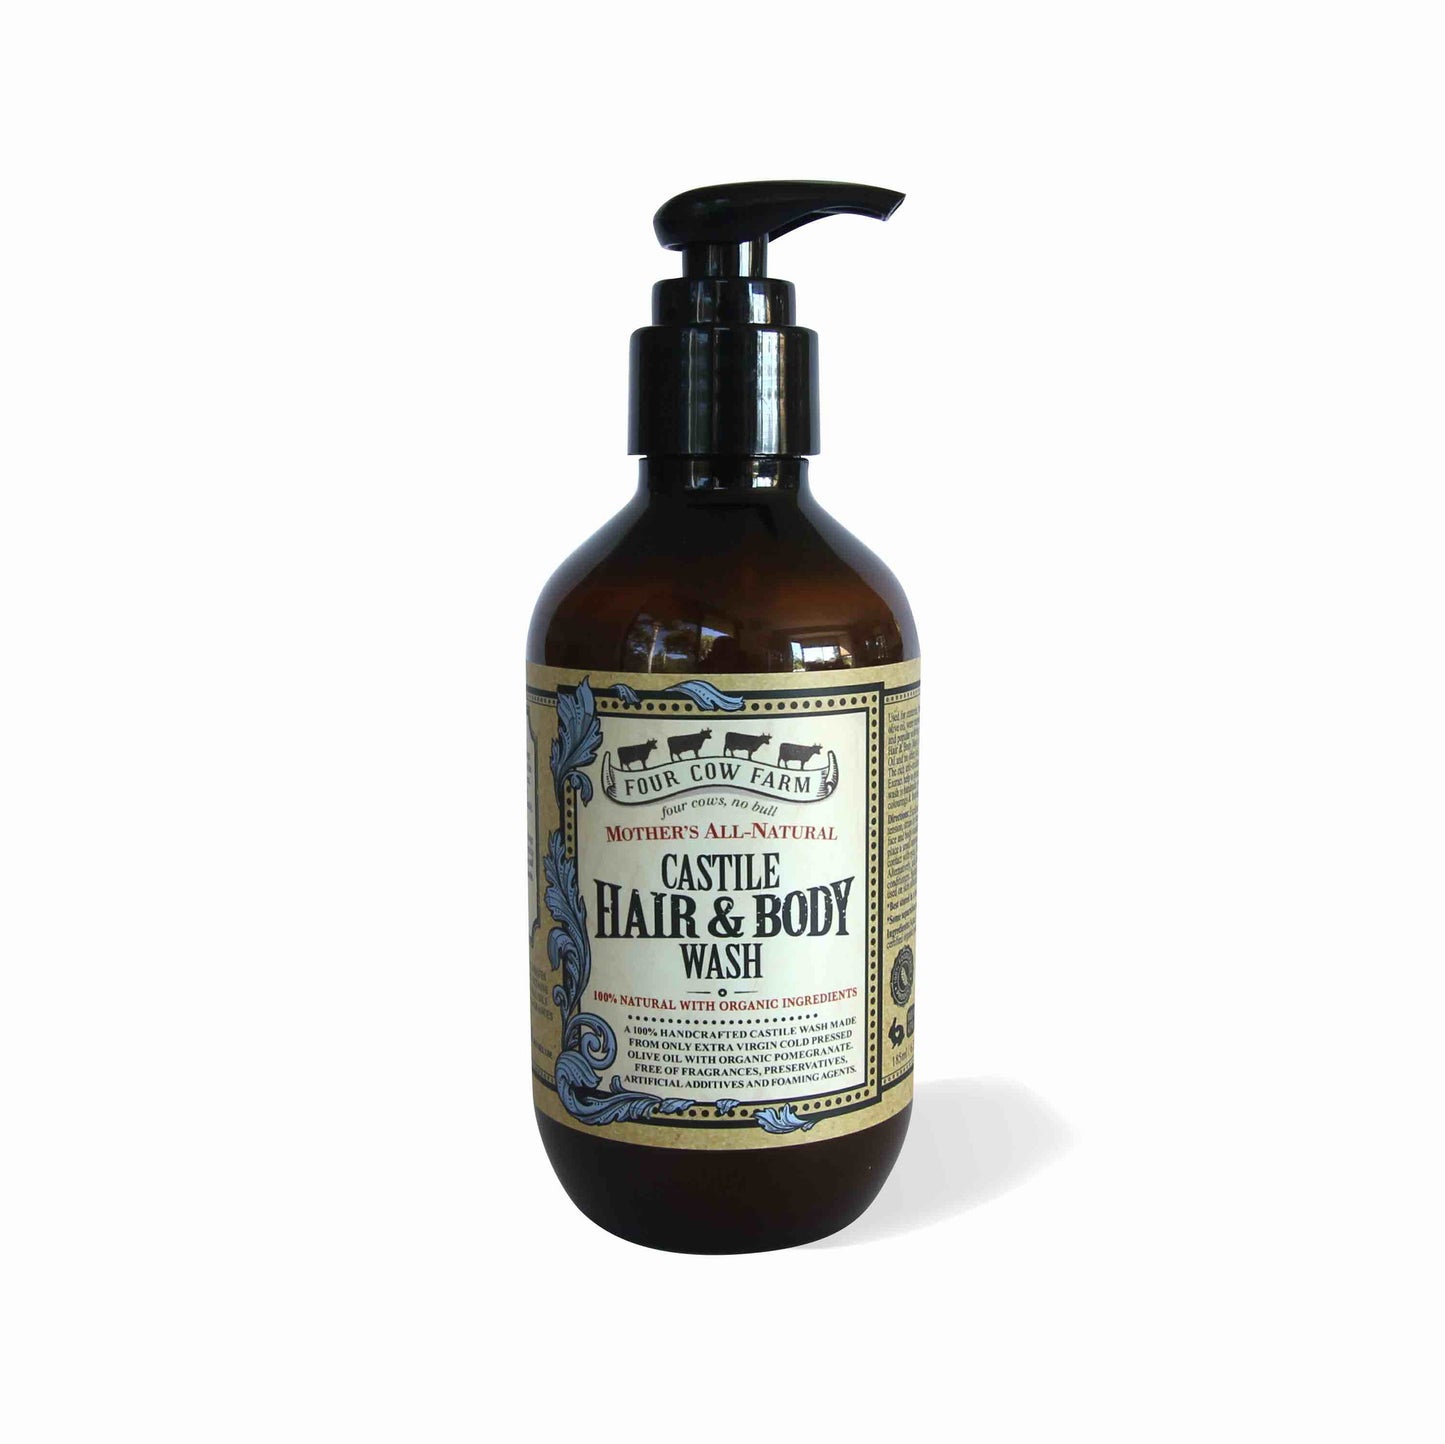 Mother’s All-Natural Castile Hair & Body Wash 185ml (Redemption)